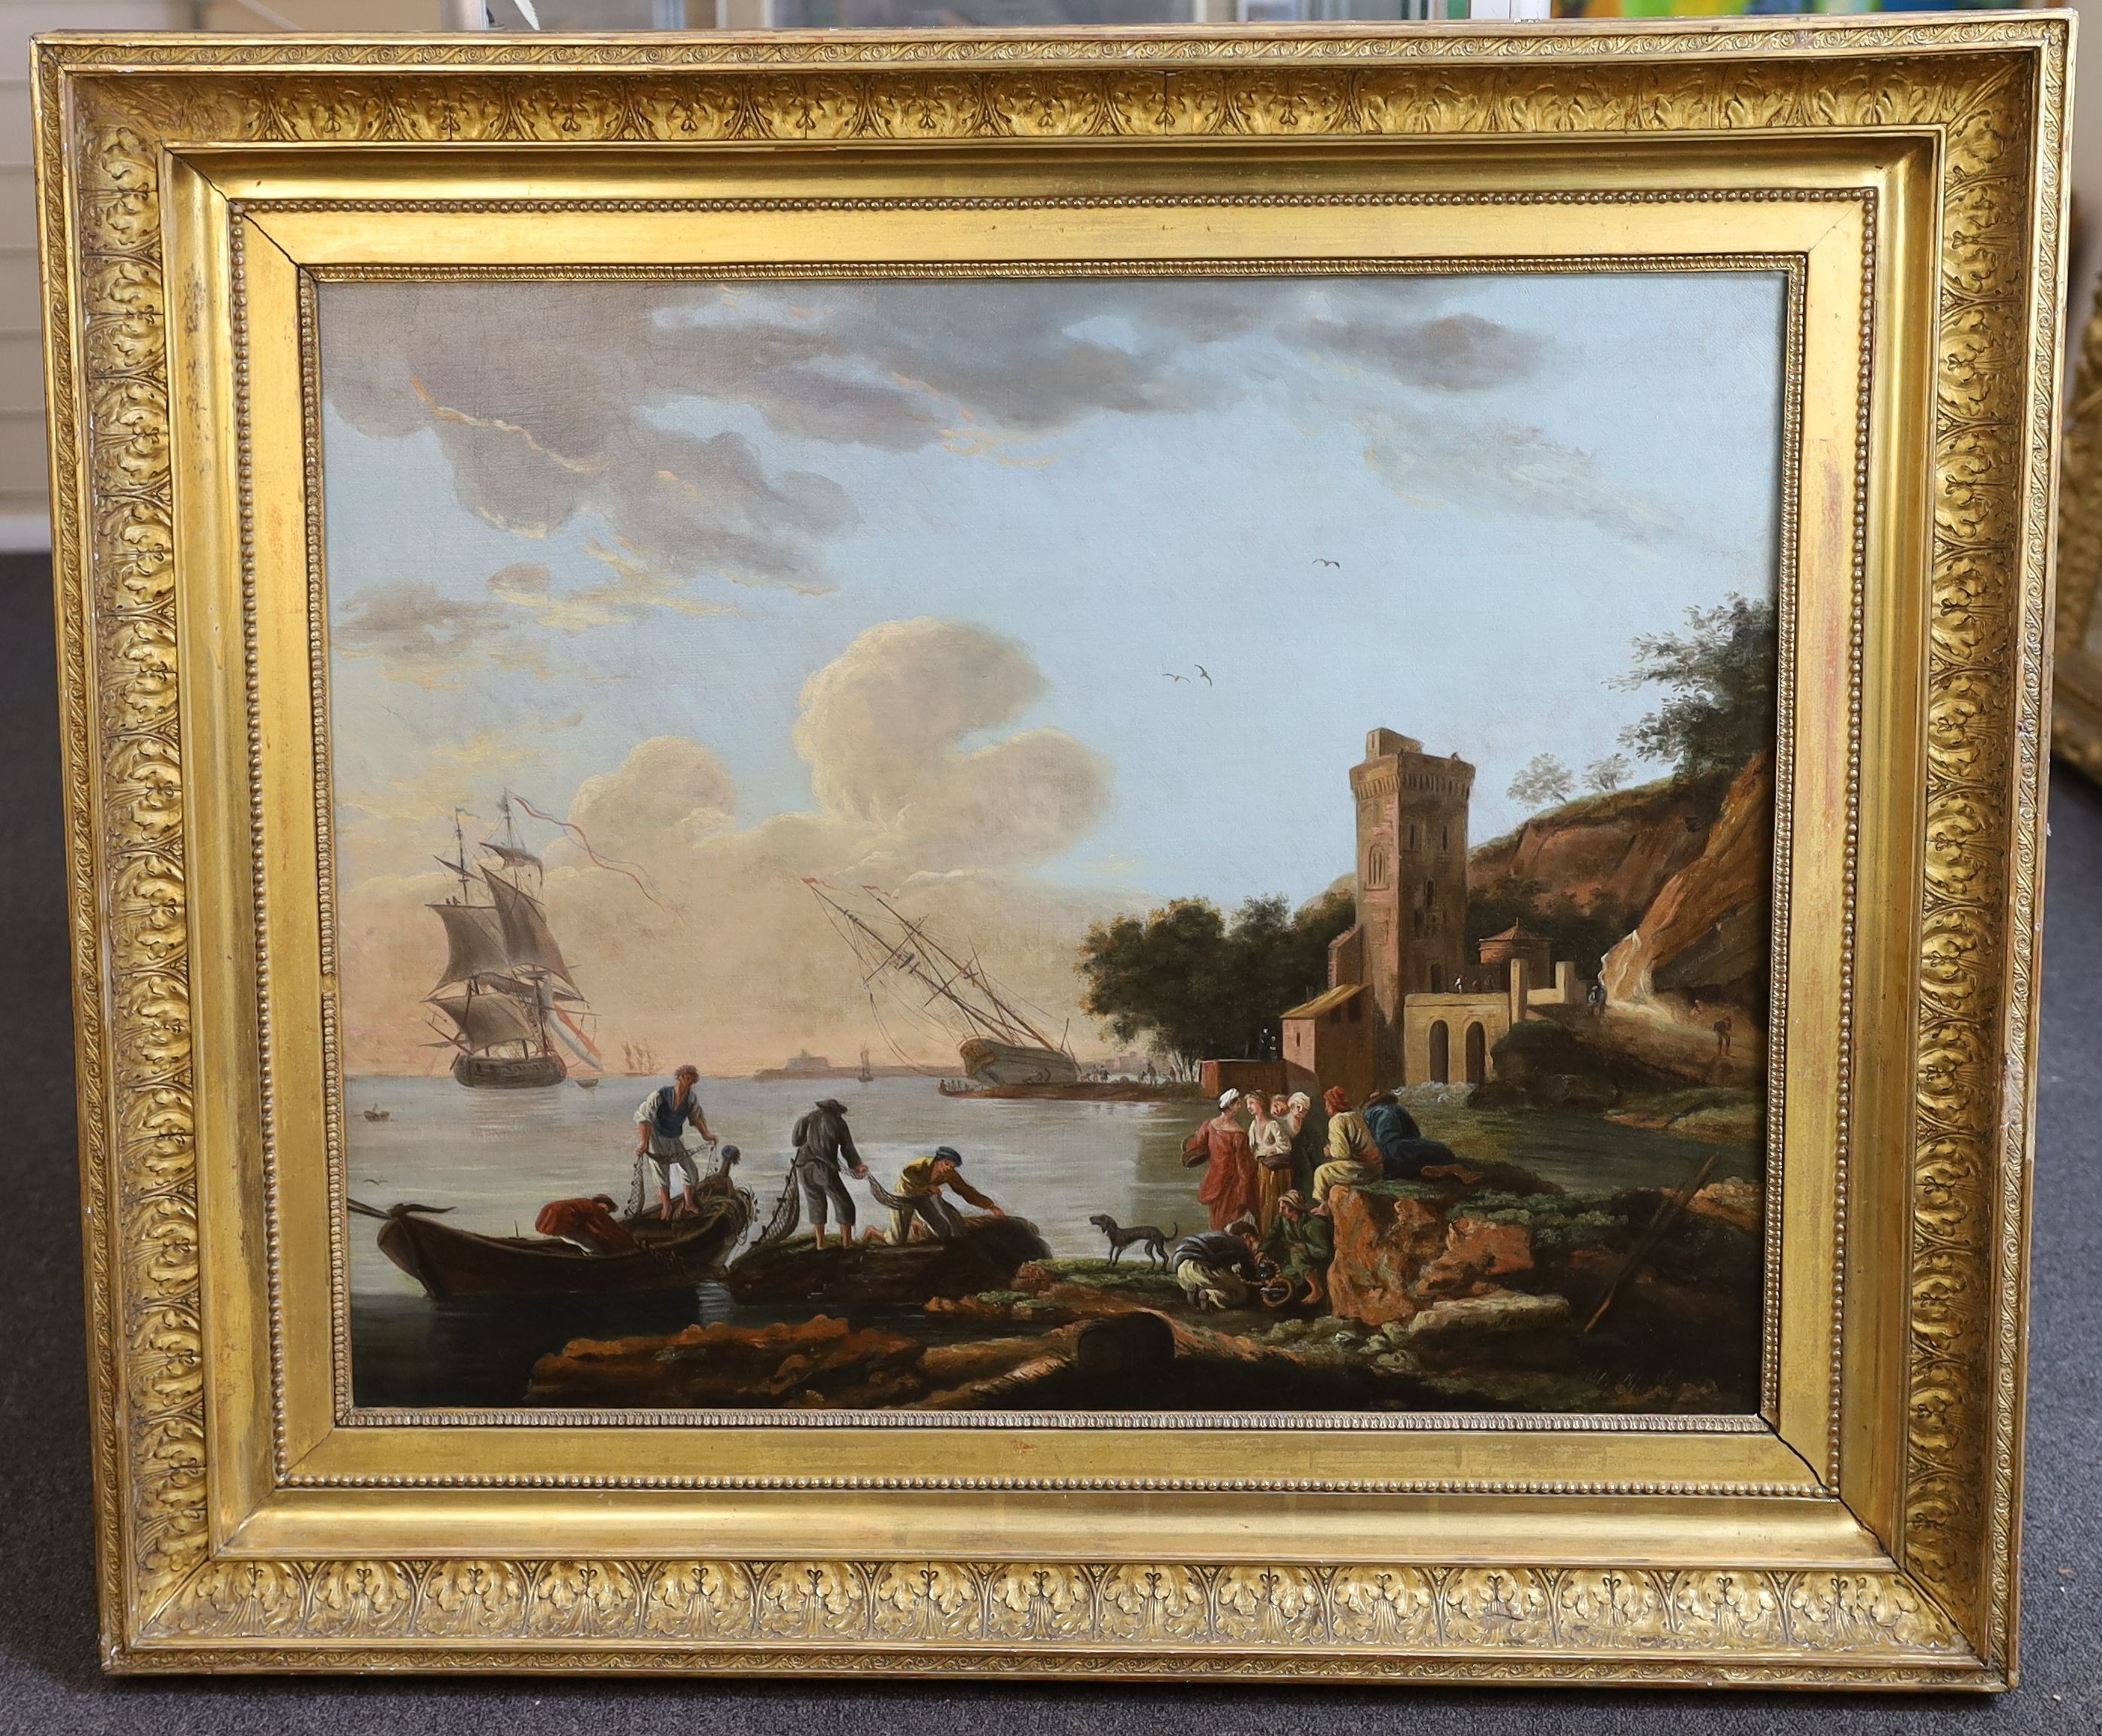 Flore Marescaille de Caffort (French, 1778-1846), Claudian style harbour scenes with figures dis-embarking and fisherfolk, pair of oils on canvas, 64 x 79cm